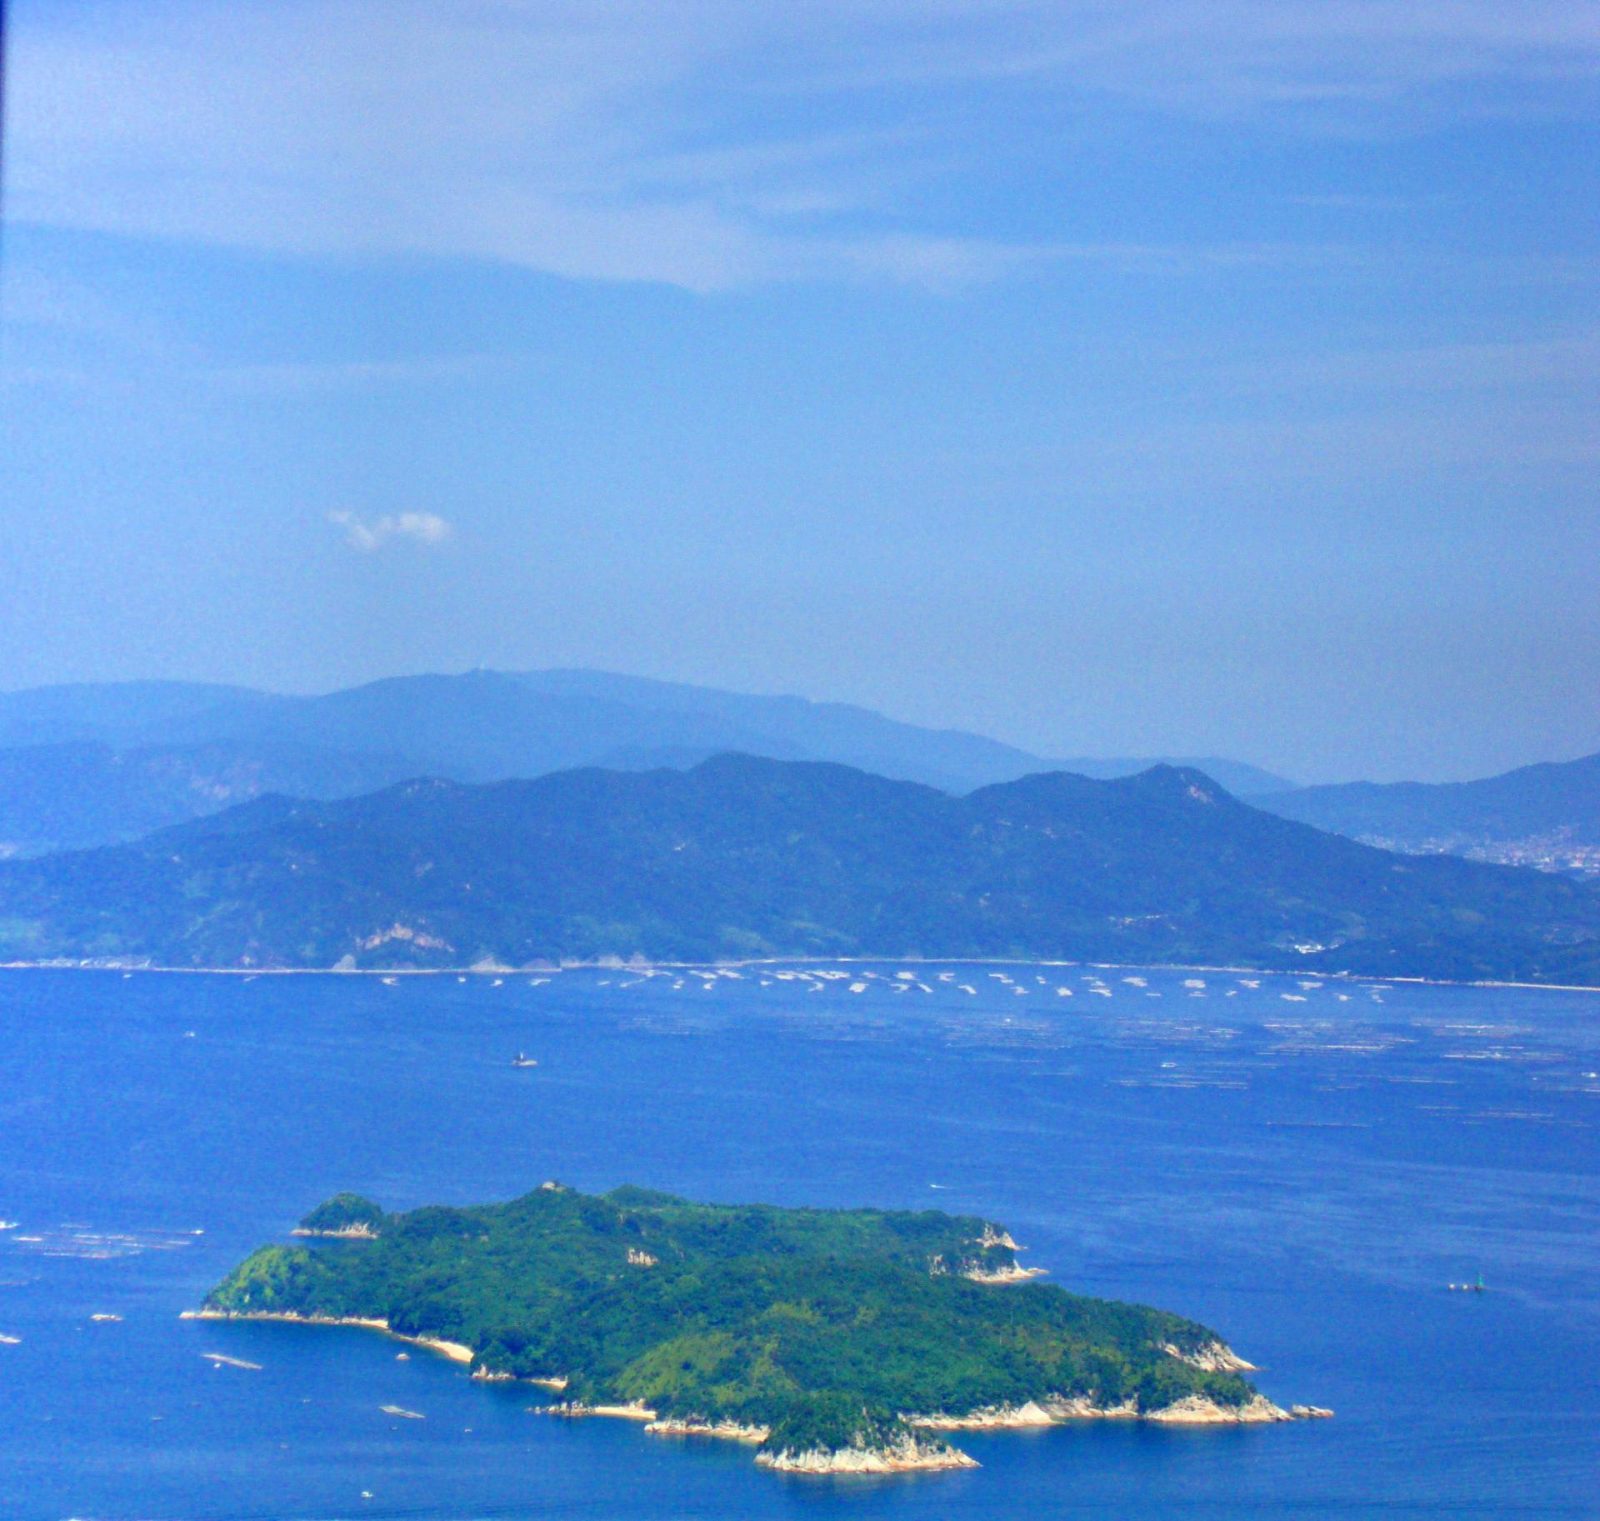 Mount Misen Ropeway: a stunning view of the Seto Inland Sea in Japan